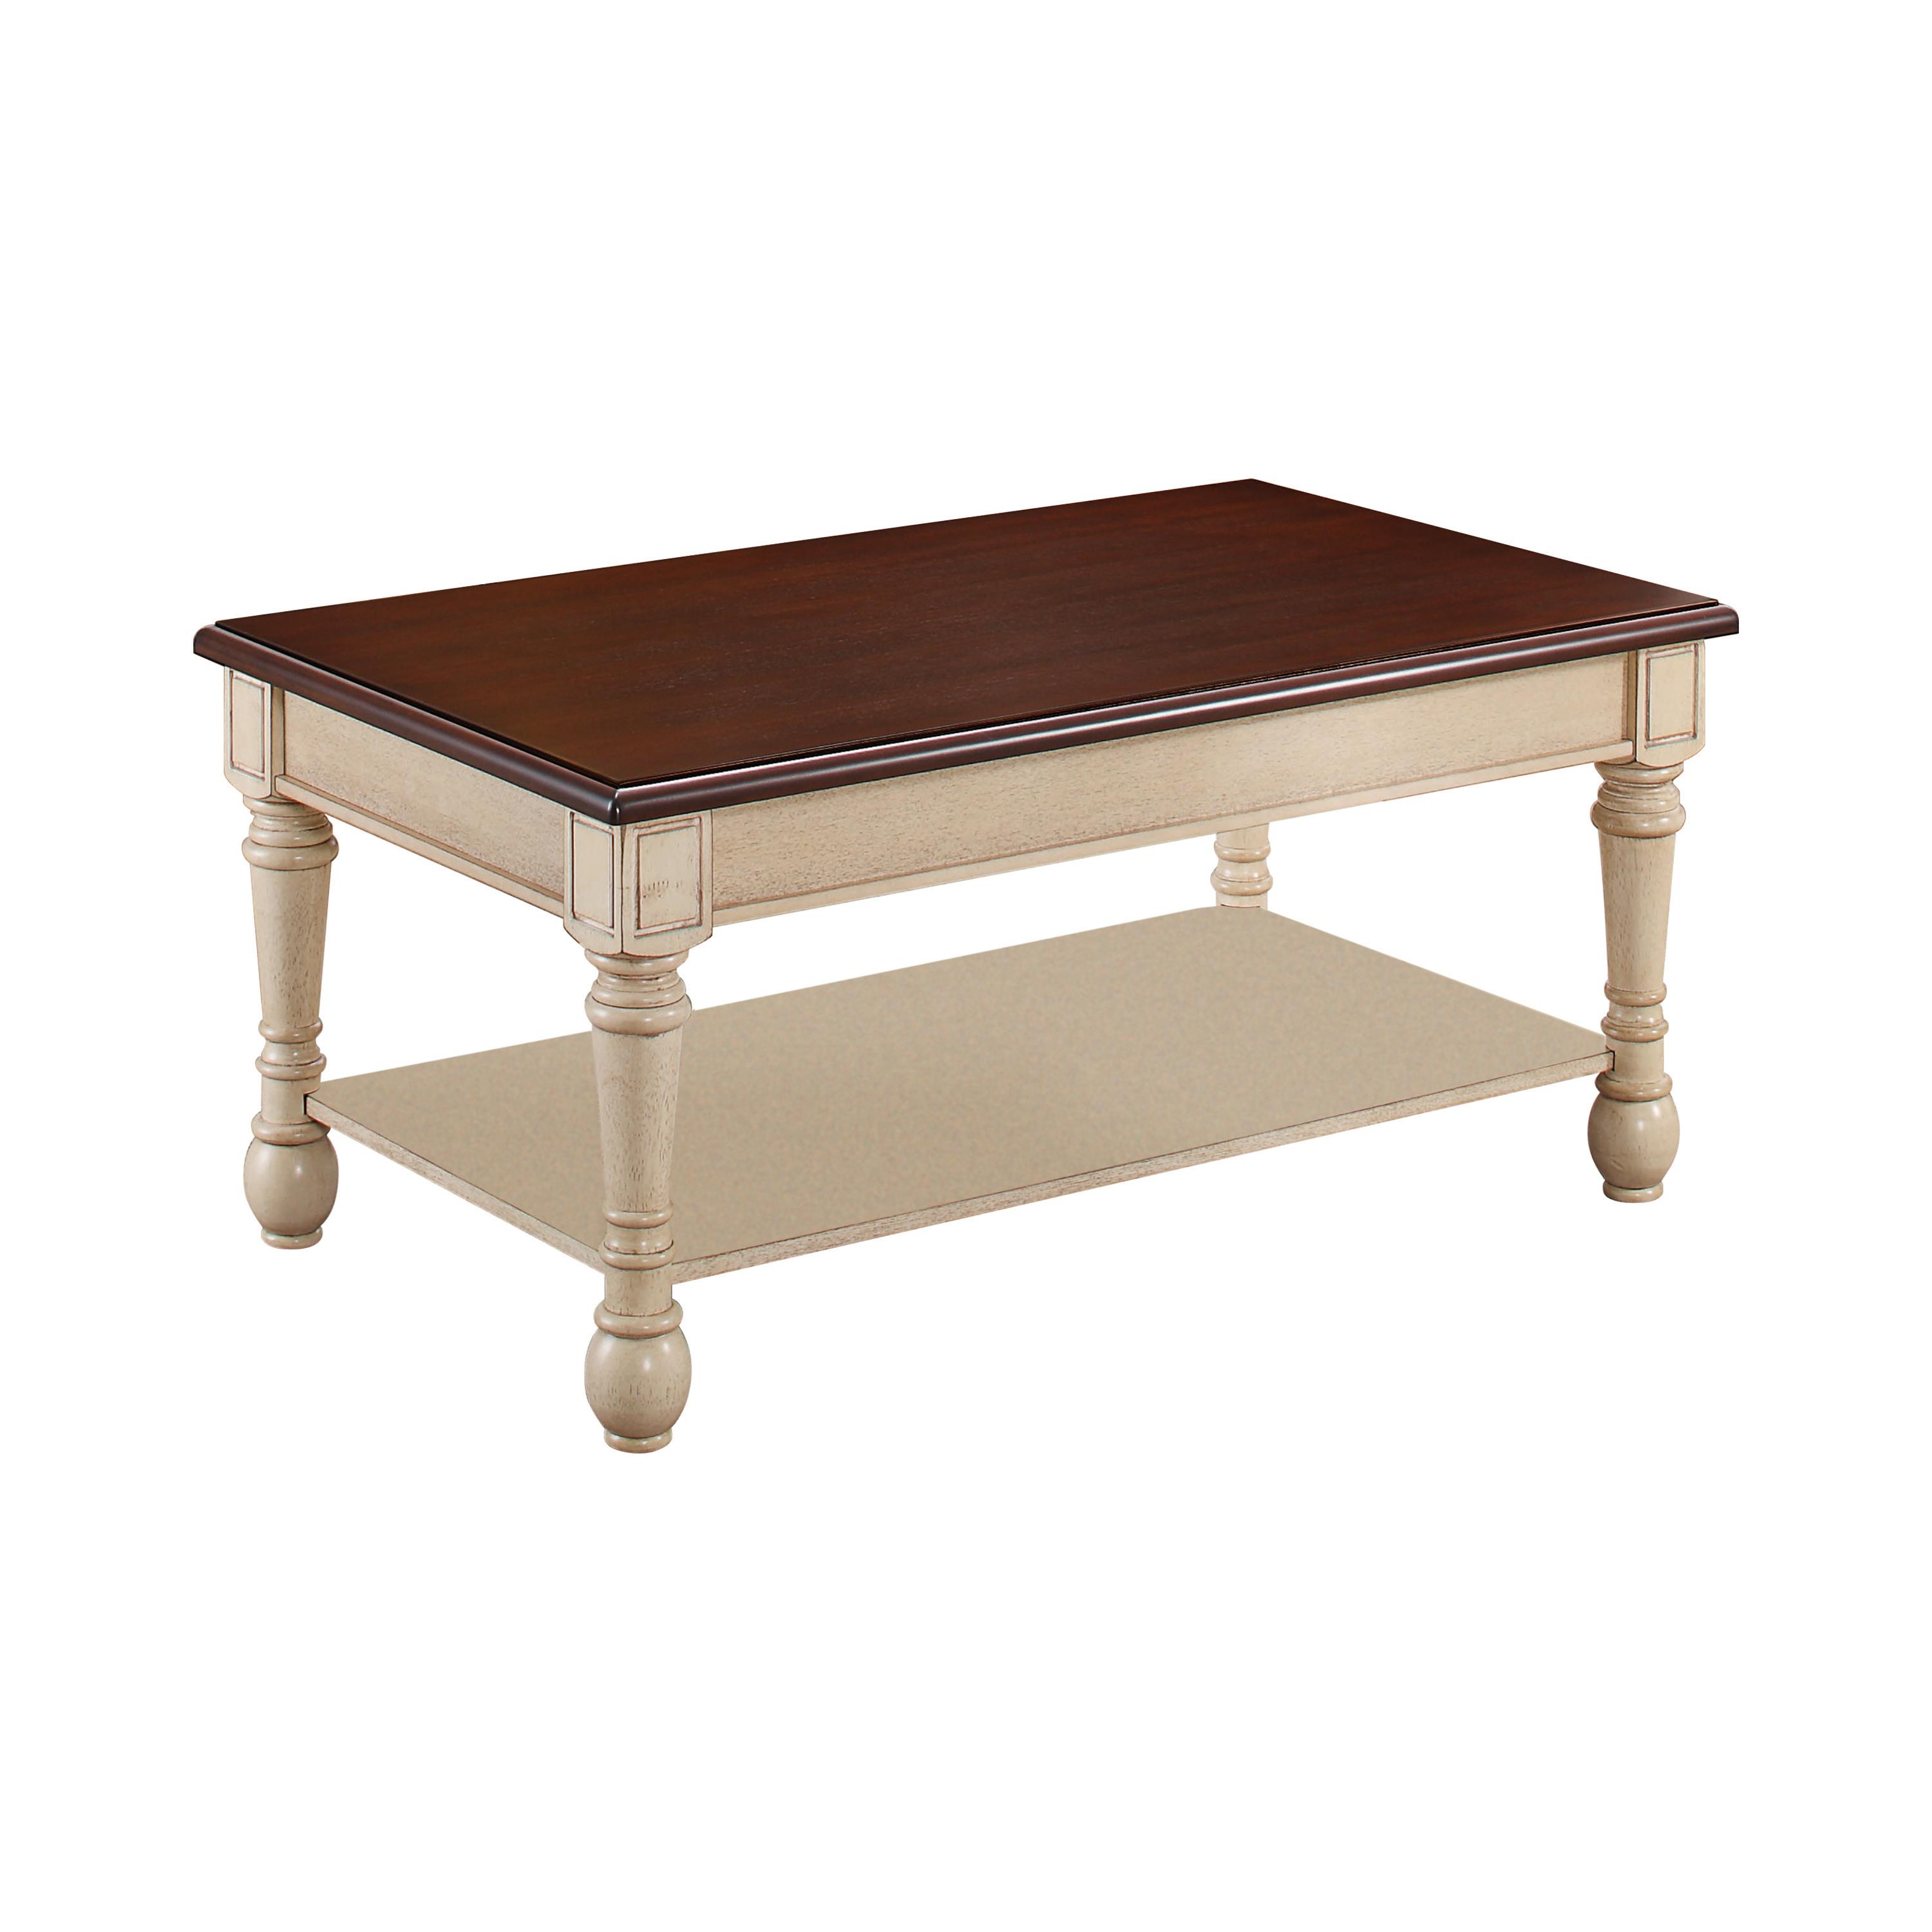 Transitional Coffee Table 704418 704418 in Dark Cherry, Antique White 